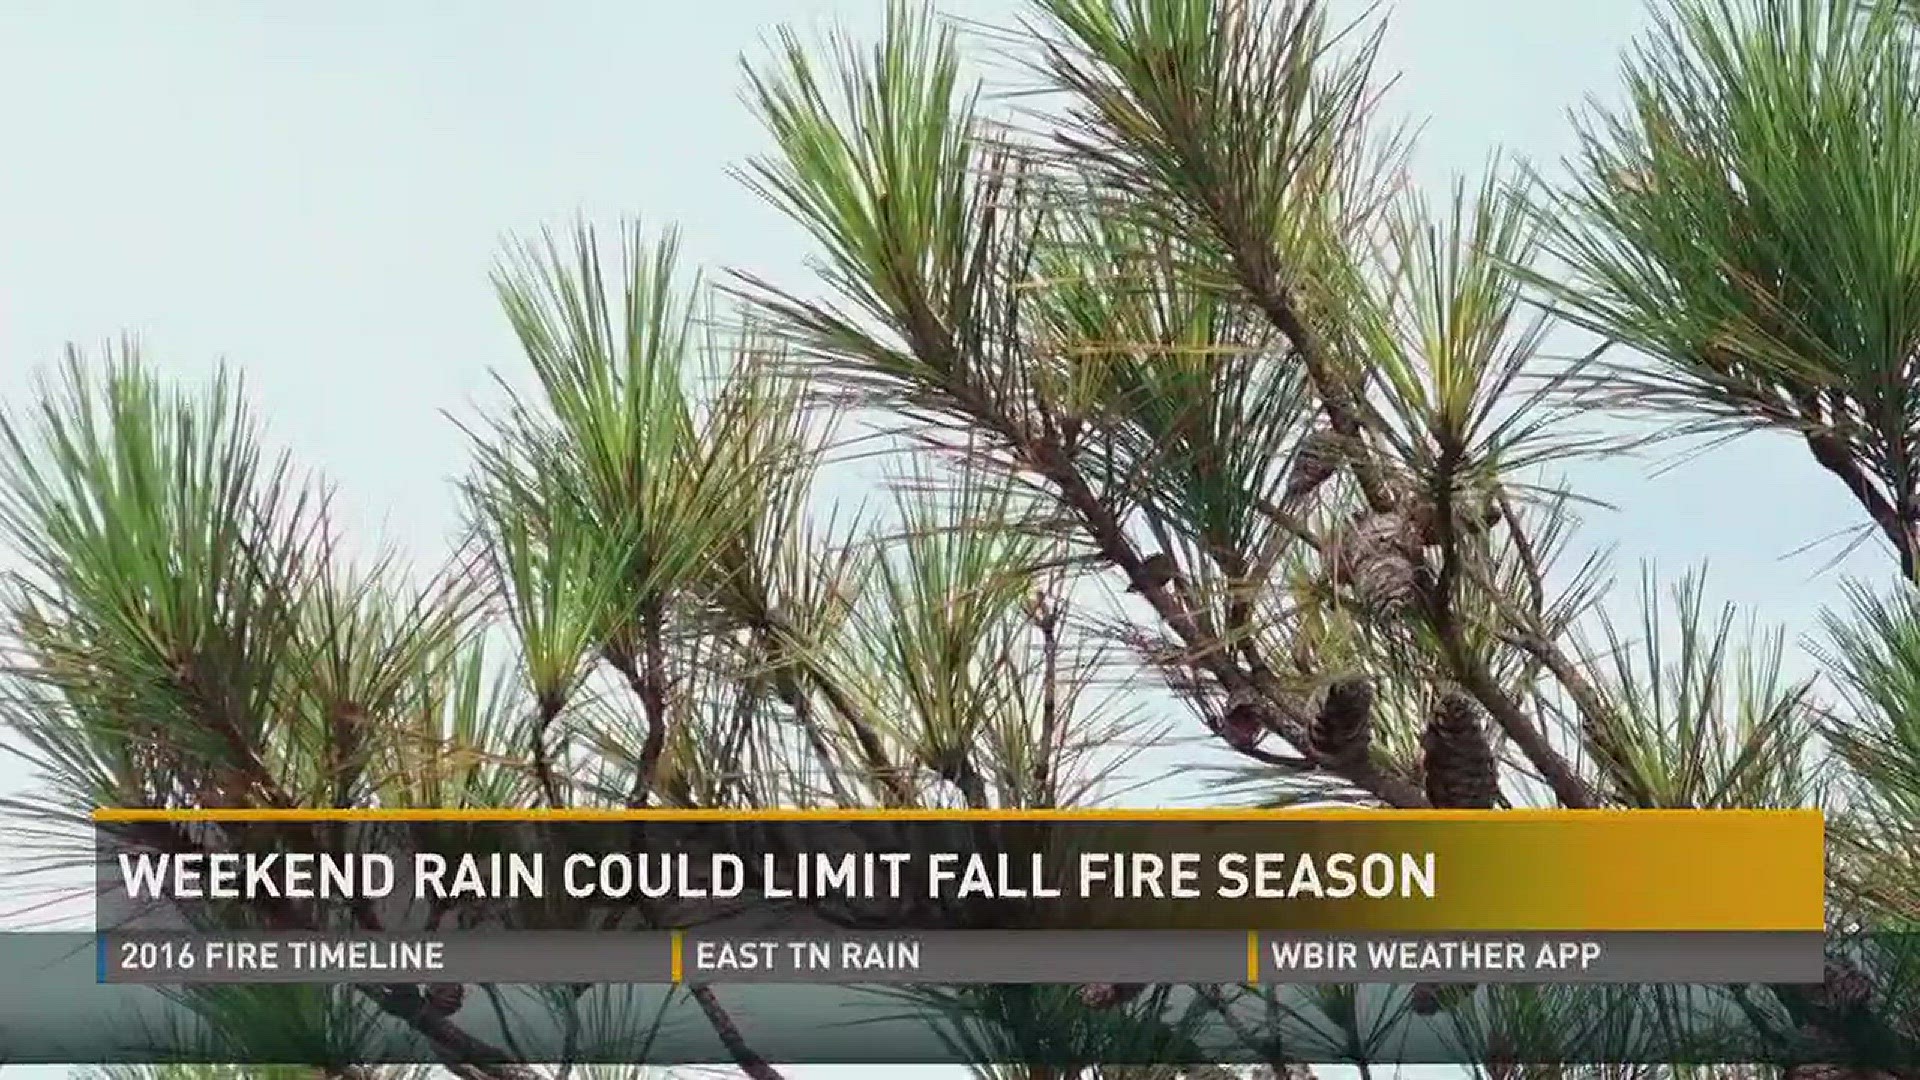 Oct. 9, 2017: With just days to go until the official start to fire season, experts say recent rain could mean a quieter year.